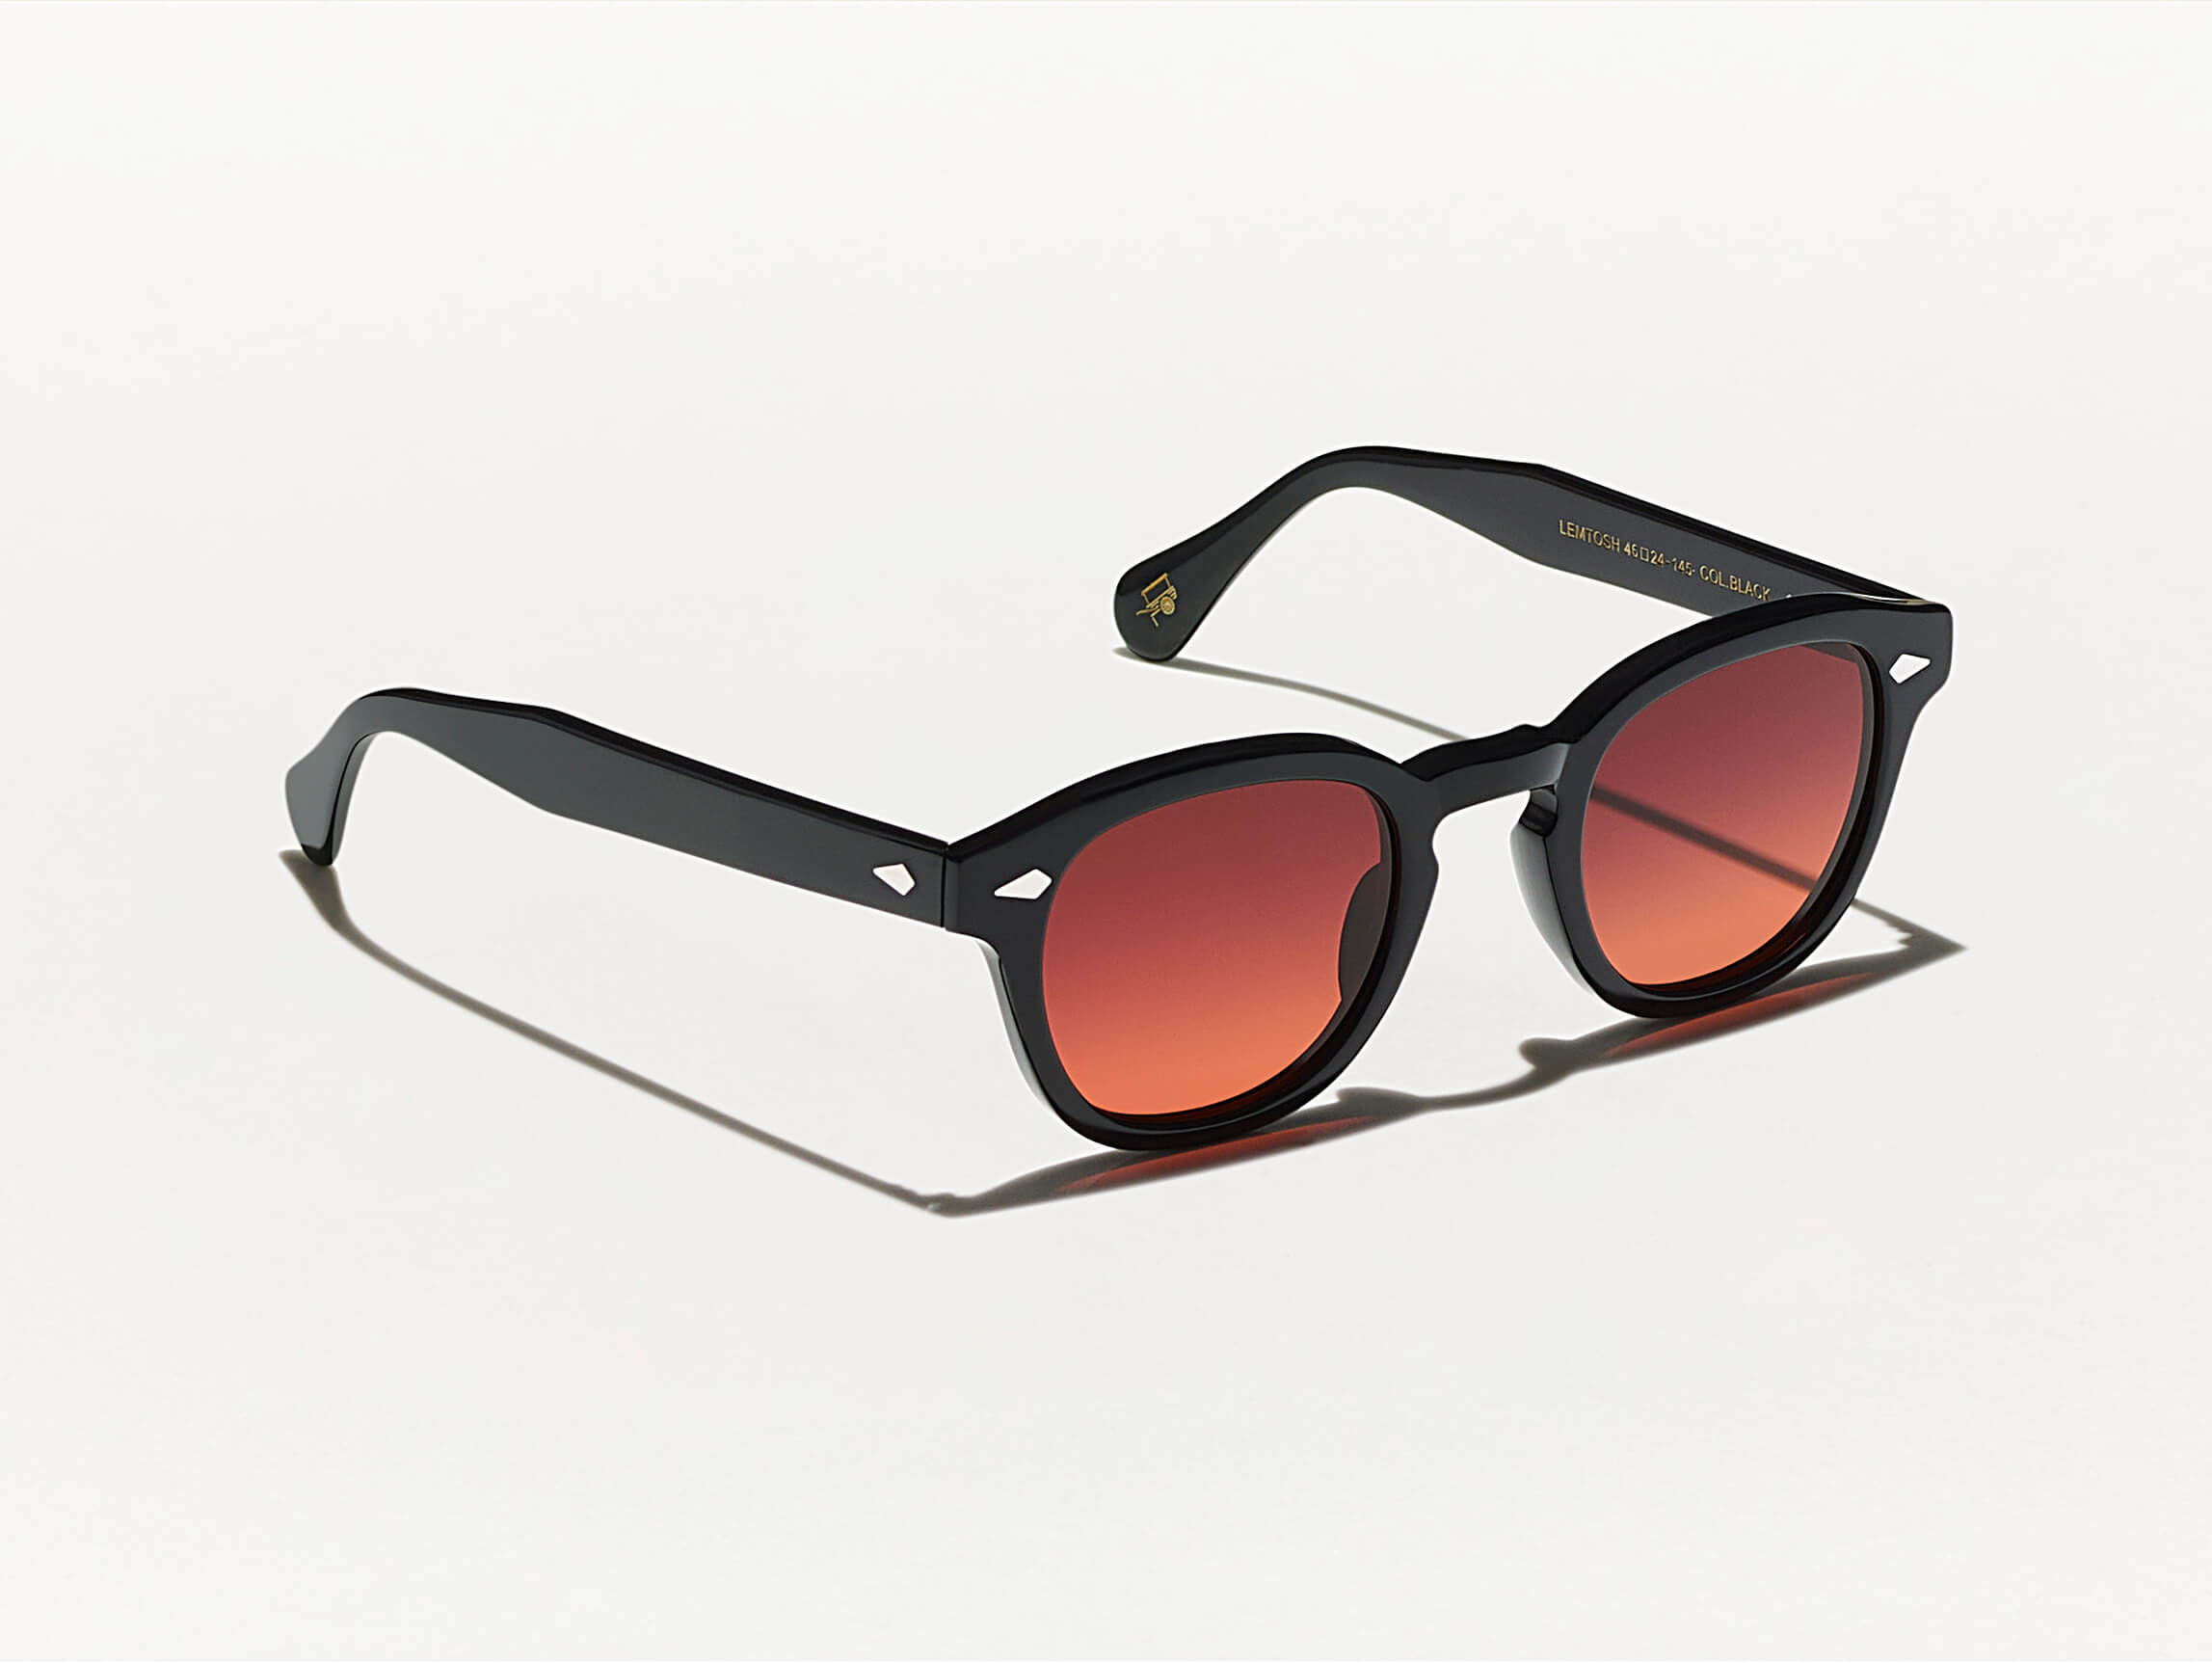 The LEMTOSH Black with Cabernet Tinted Lenses